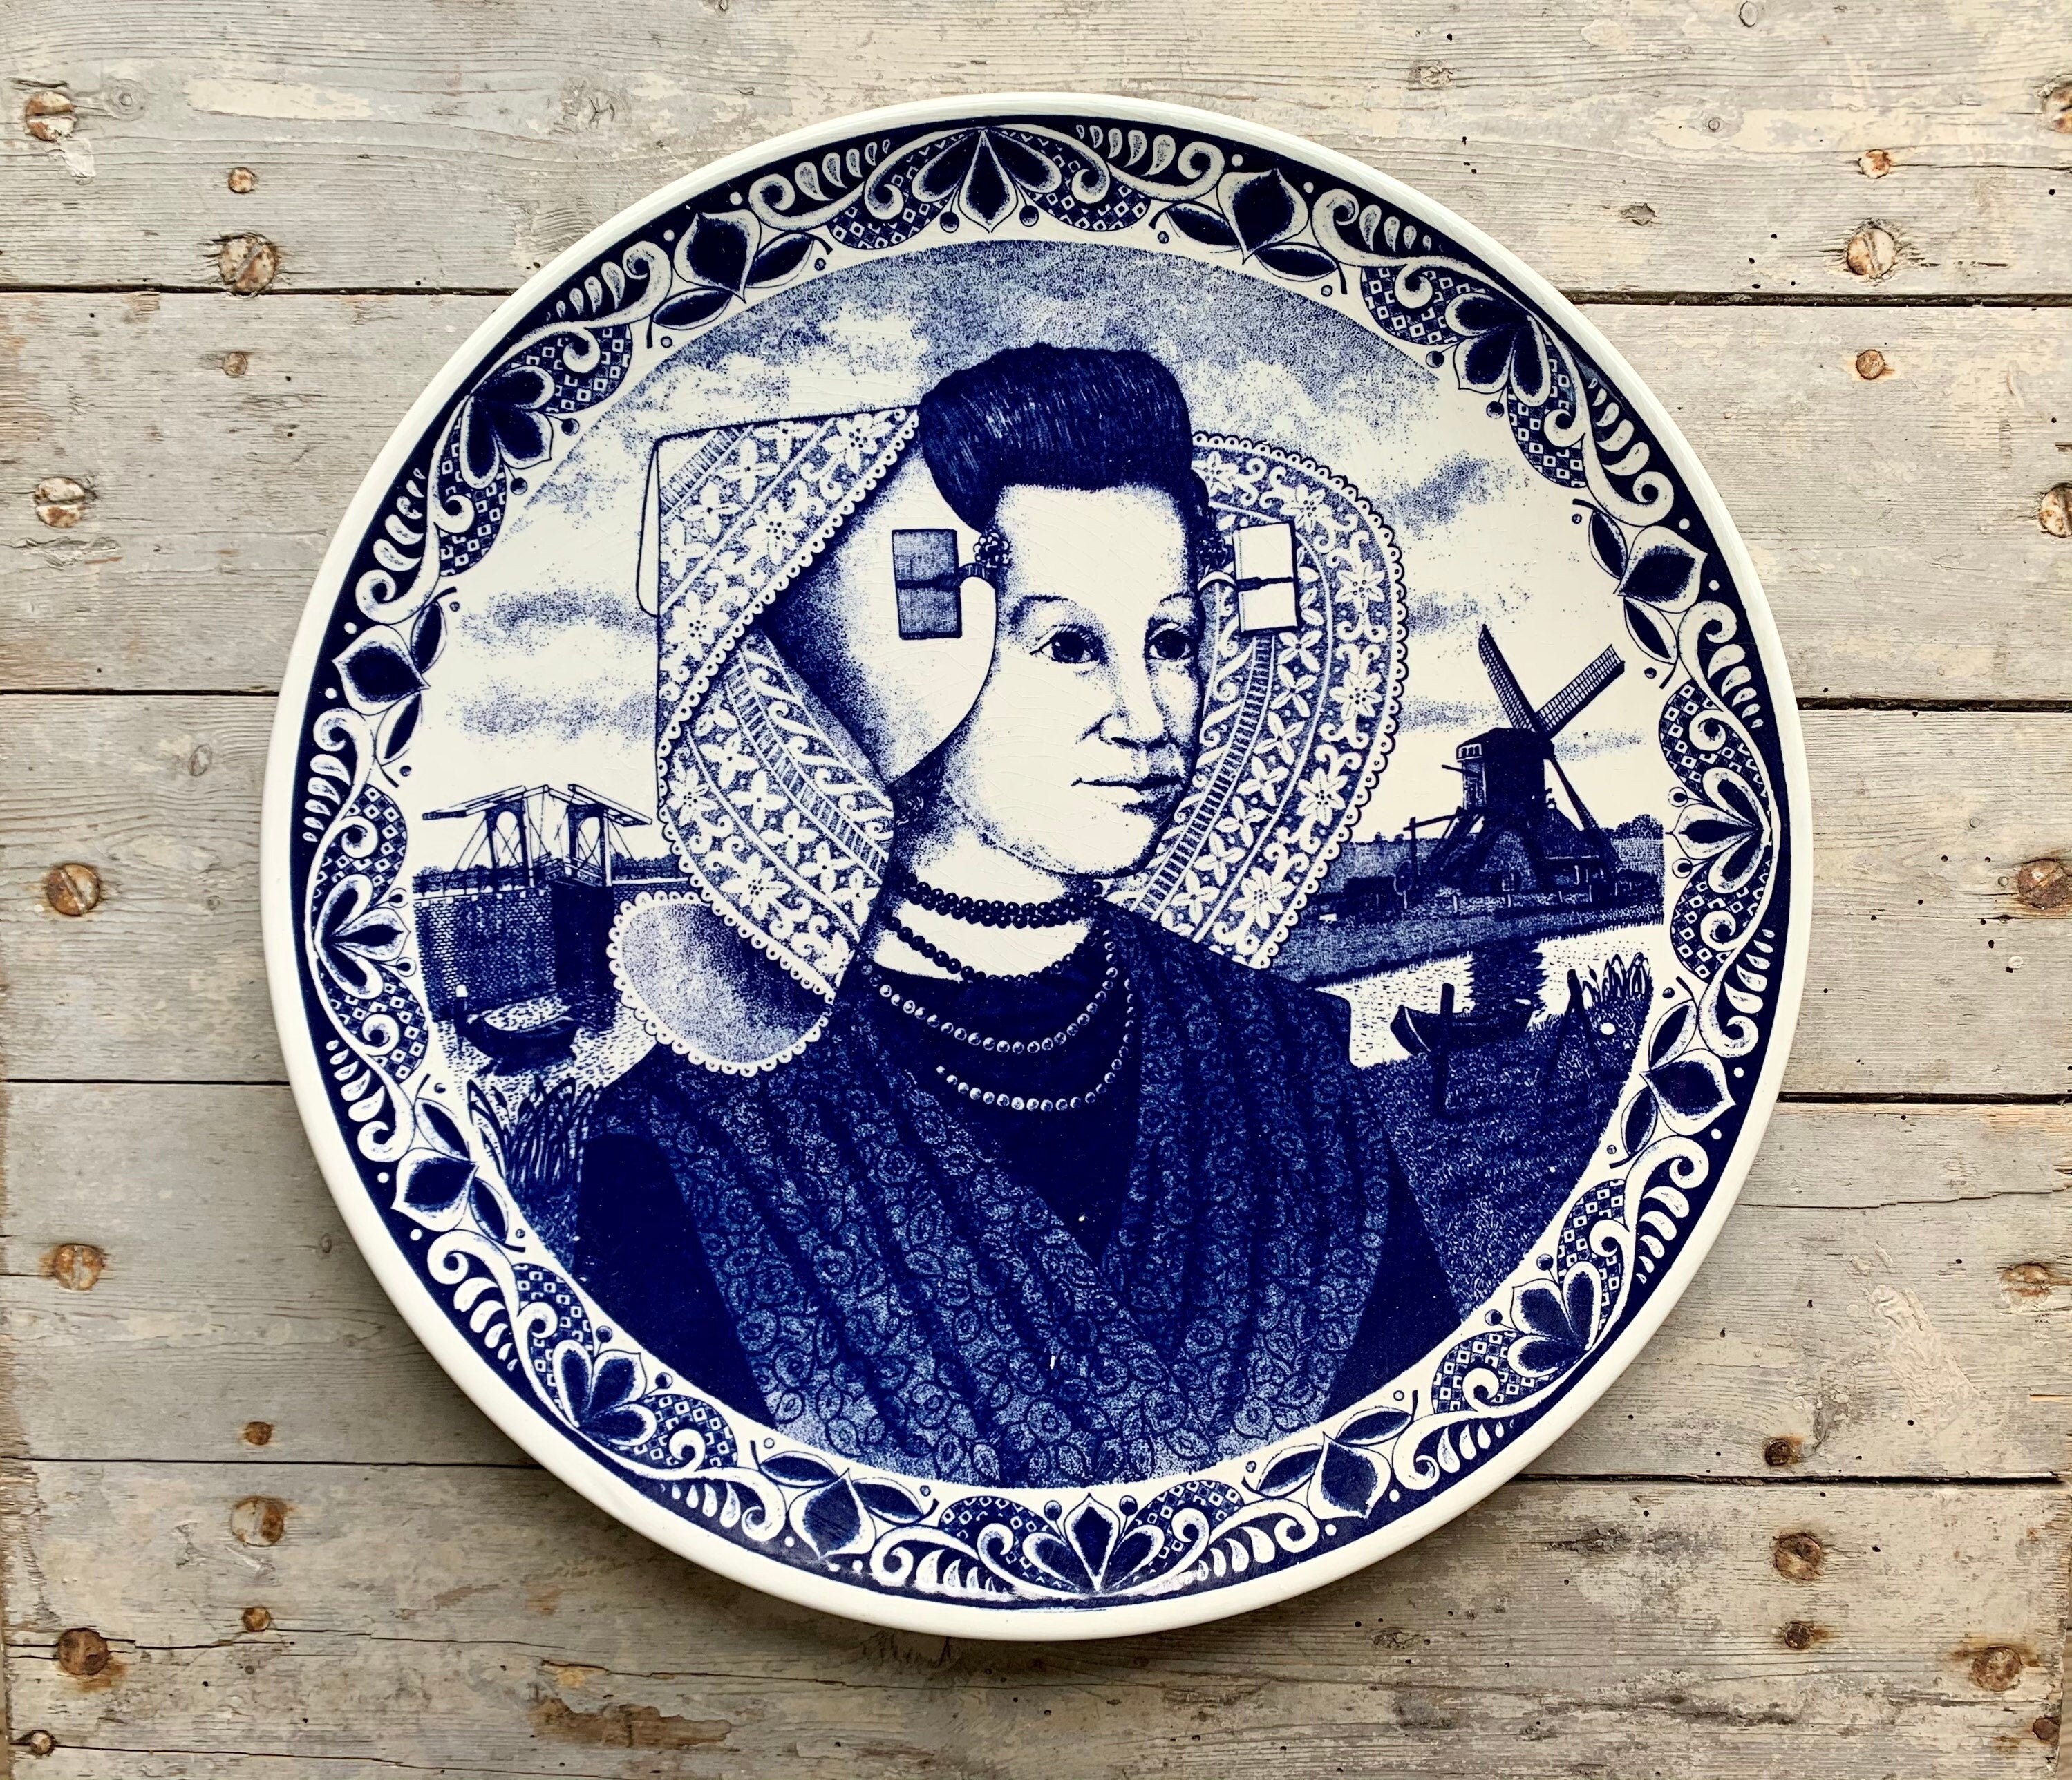 1970 ~ Earthenware Decorative Plate Vintage Made in Holland By Delfts Blauw Chemkefa Traditional Cha